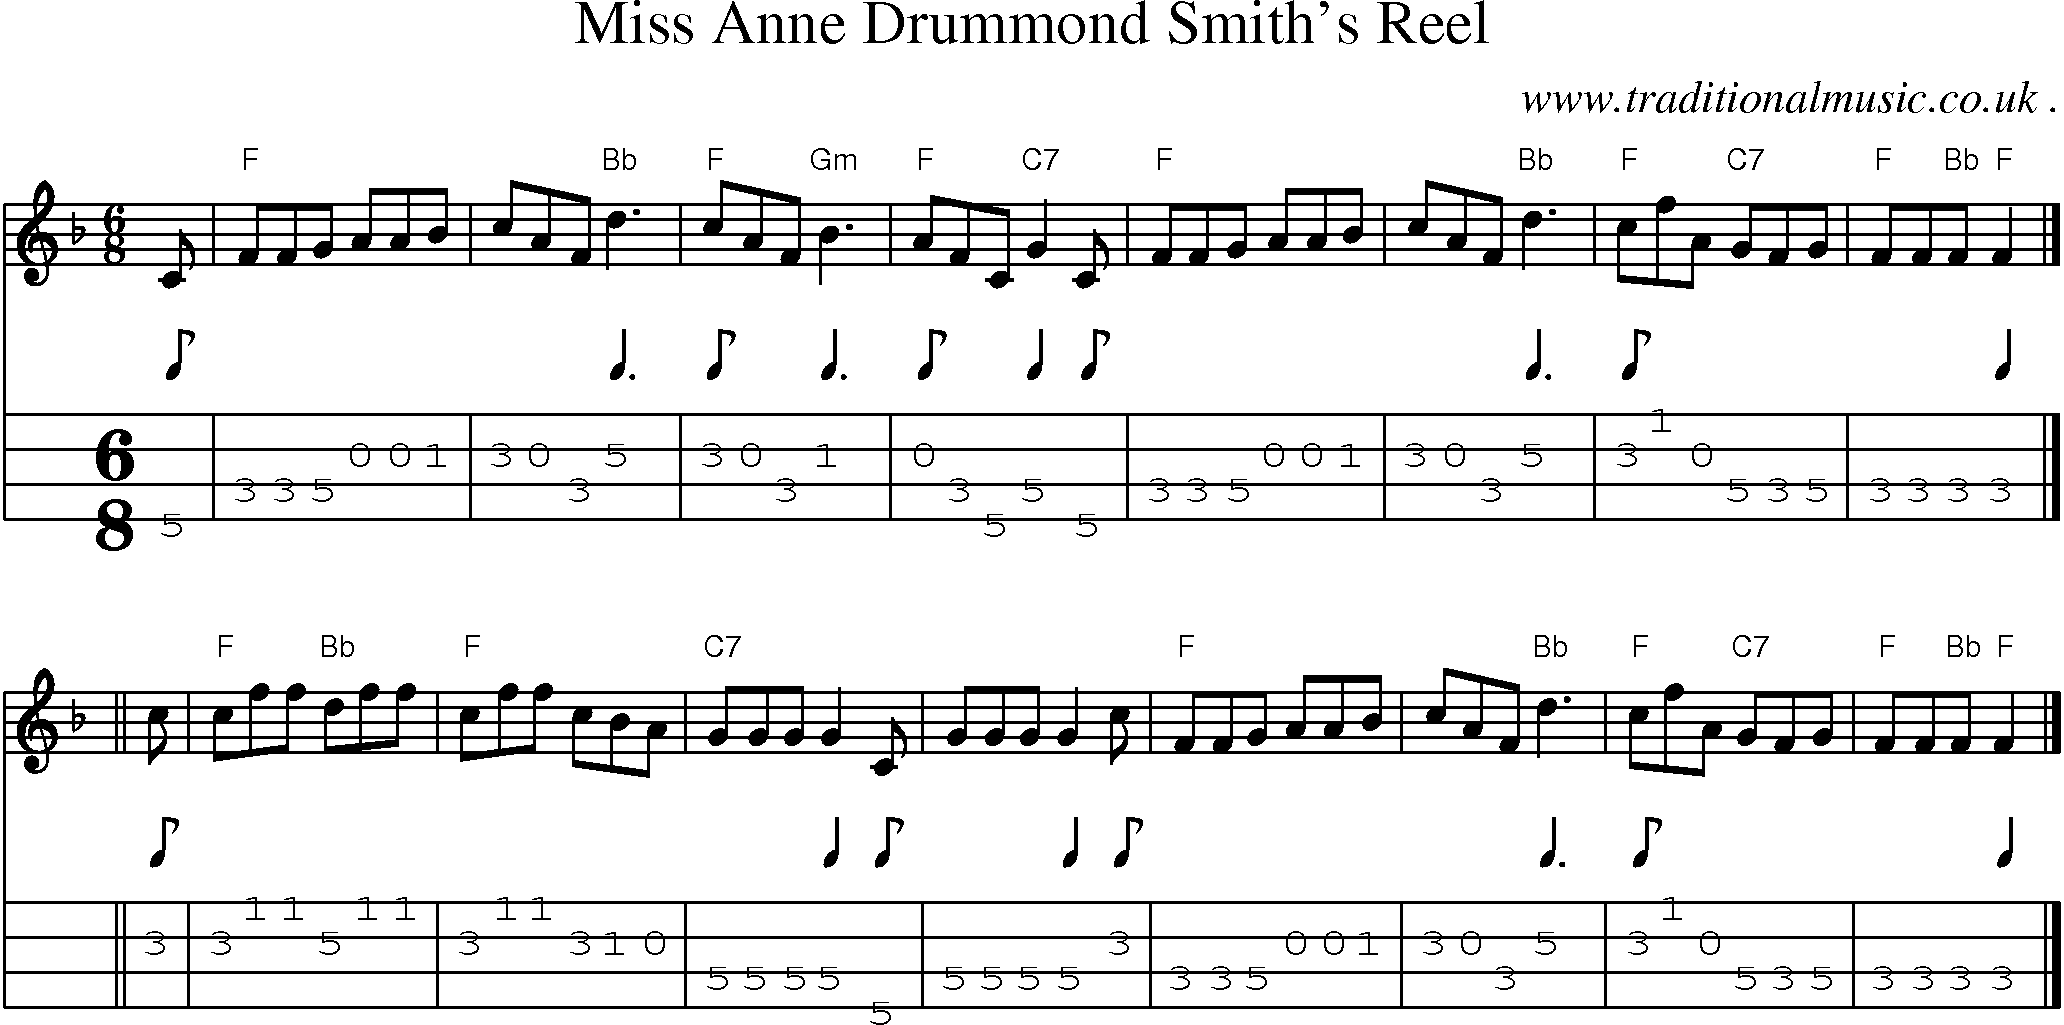 Sheet-music  score, Chords and Mandolin Tabs for Miss Anne Drummond Smiths Reel